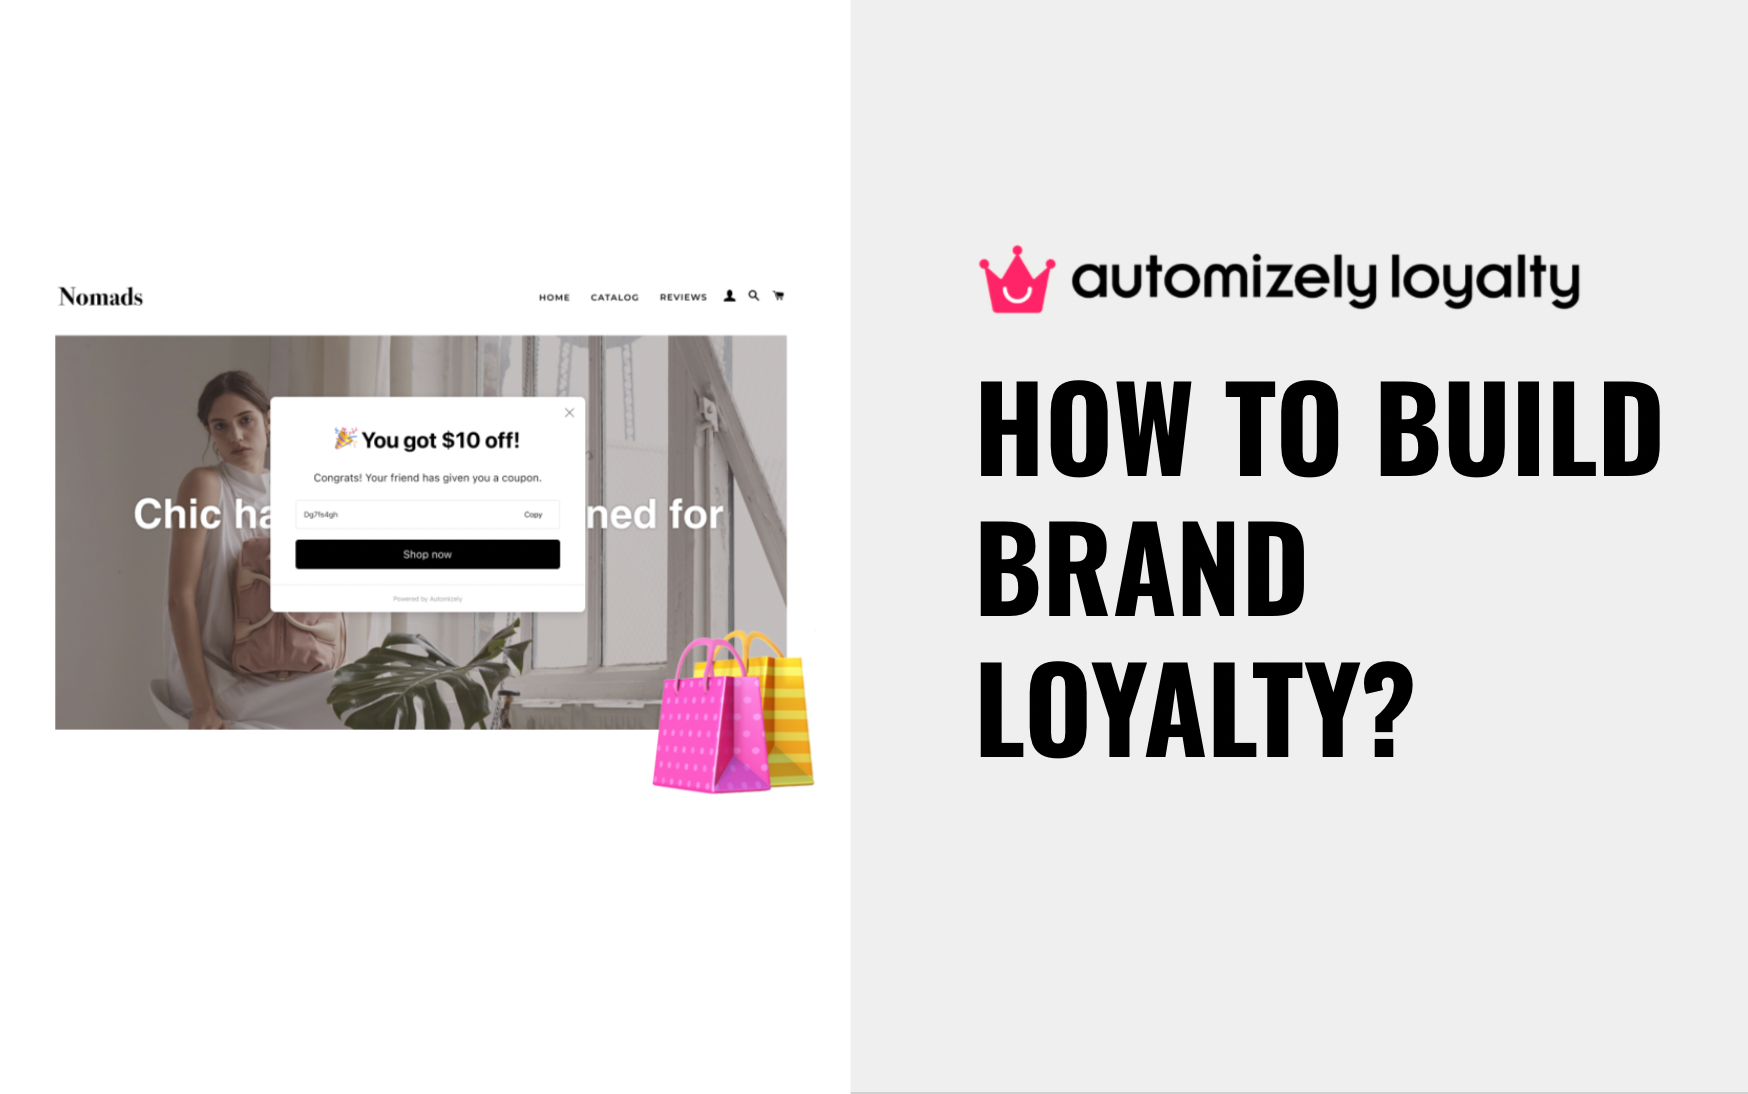 How to build brand loyalty as an Ecommerce Brand?